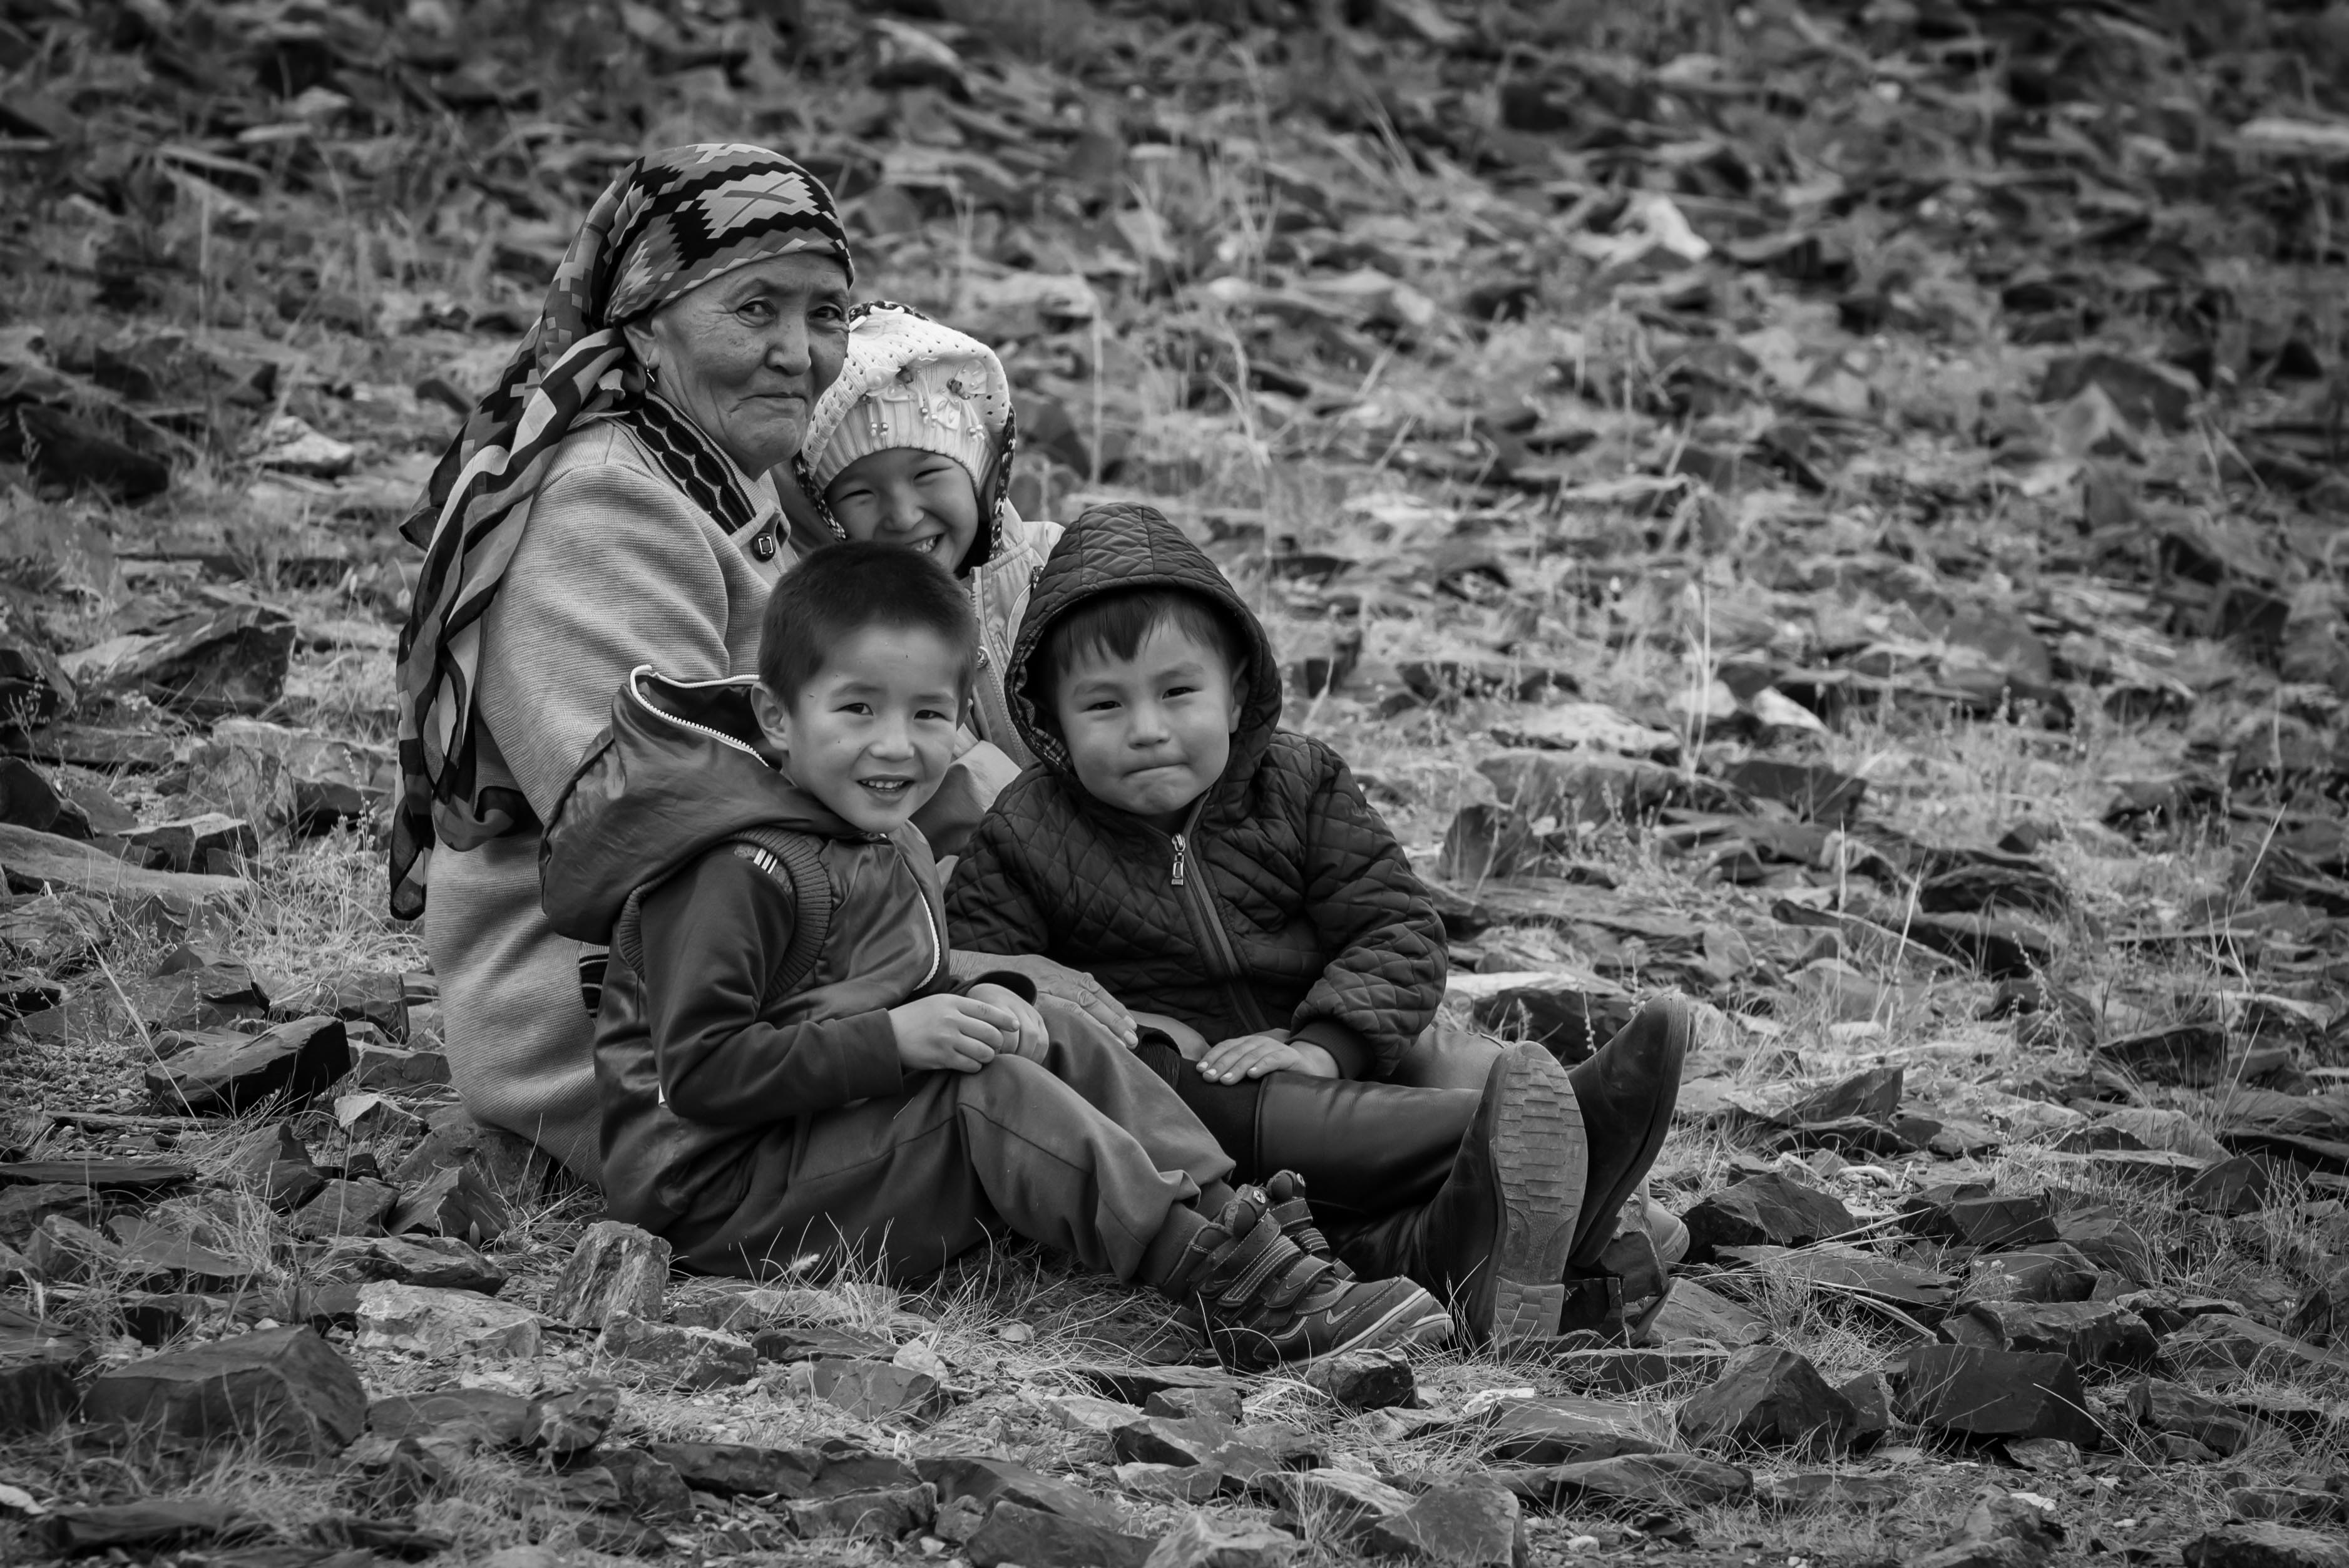 Spectators of the Golden Eagle Festival include young and old, demonstrating the support of all family members who must survive on this tradition for food and warmth in the harsh Mongolian winters.